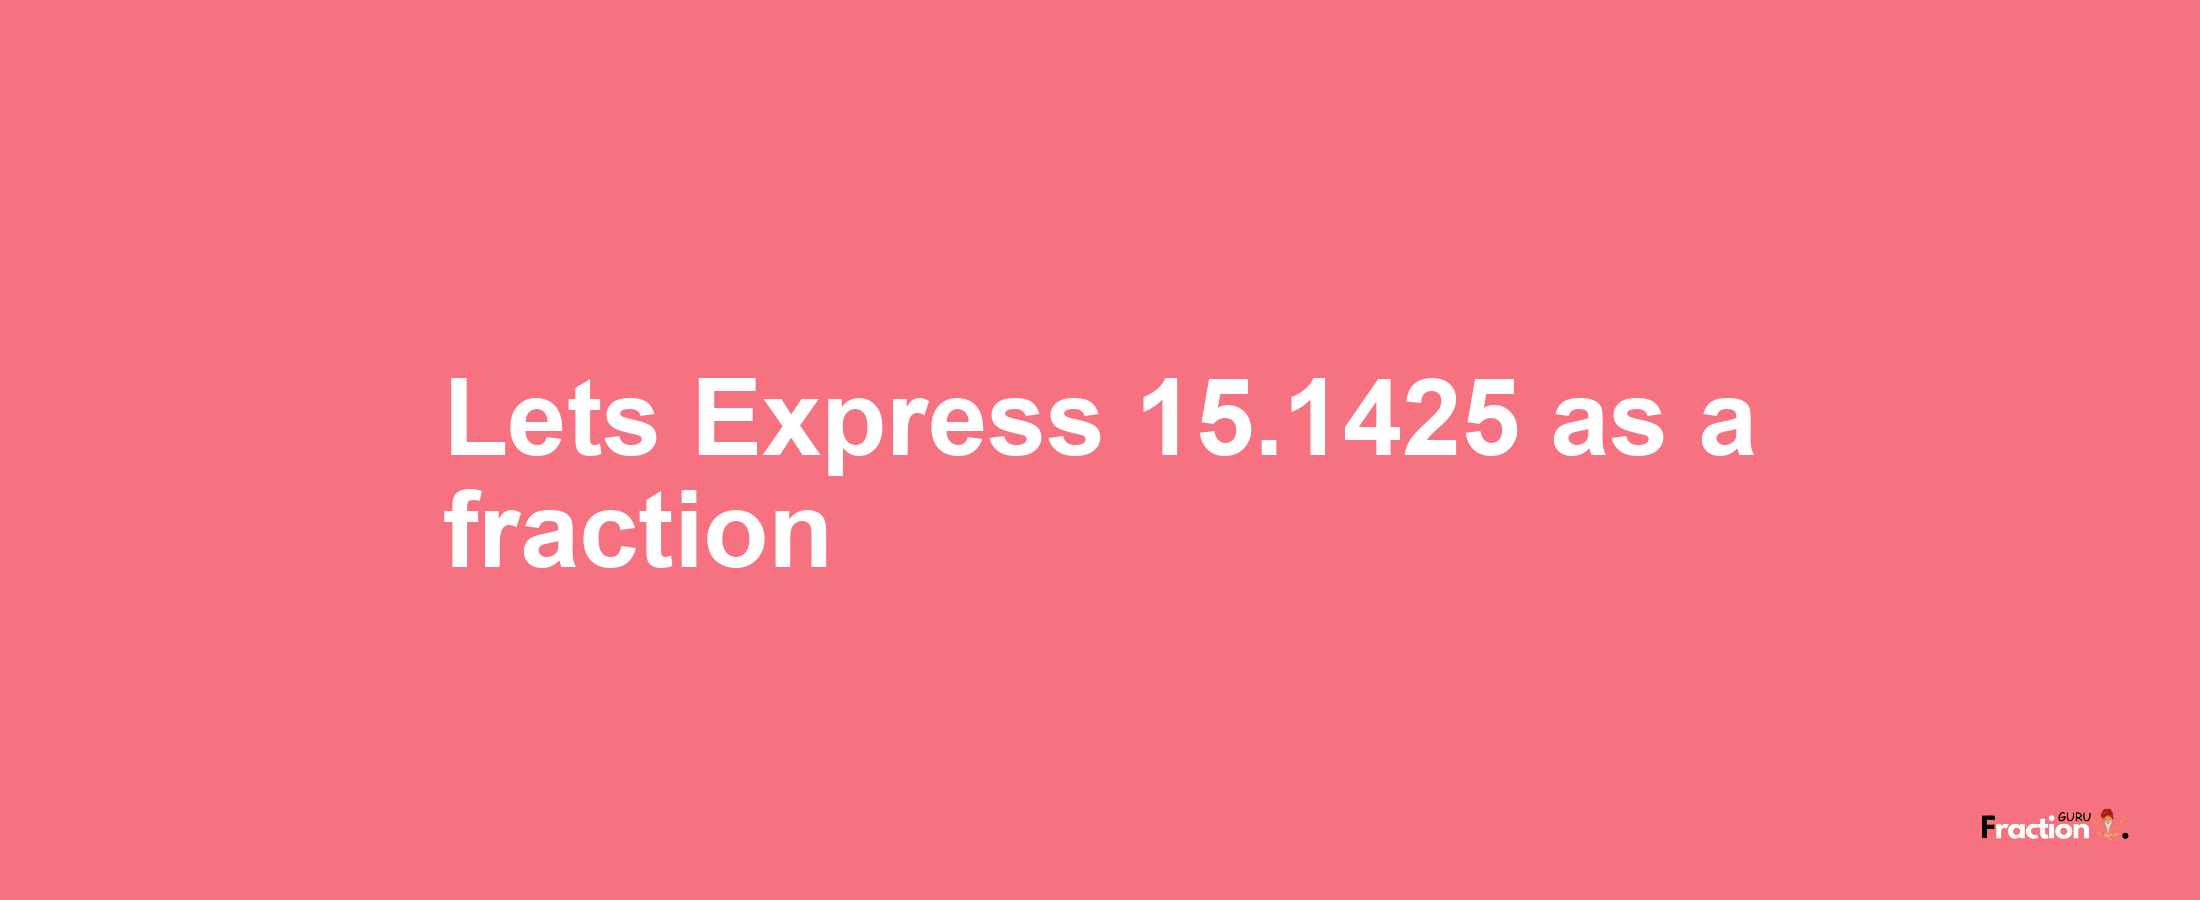 Lets Express 15.1425 as afraction